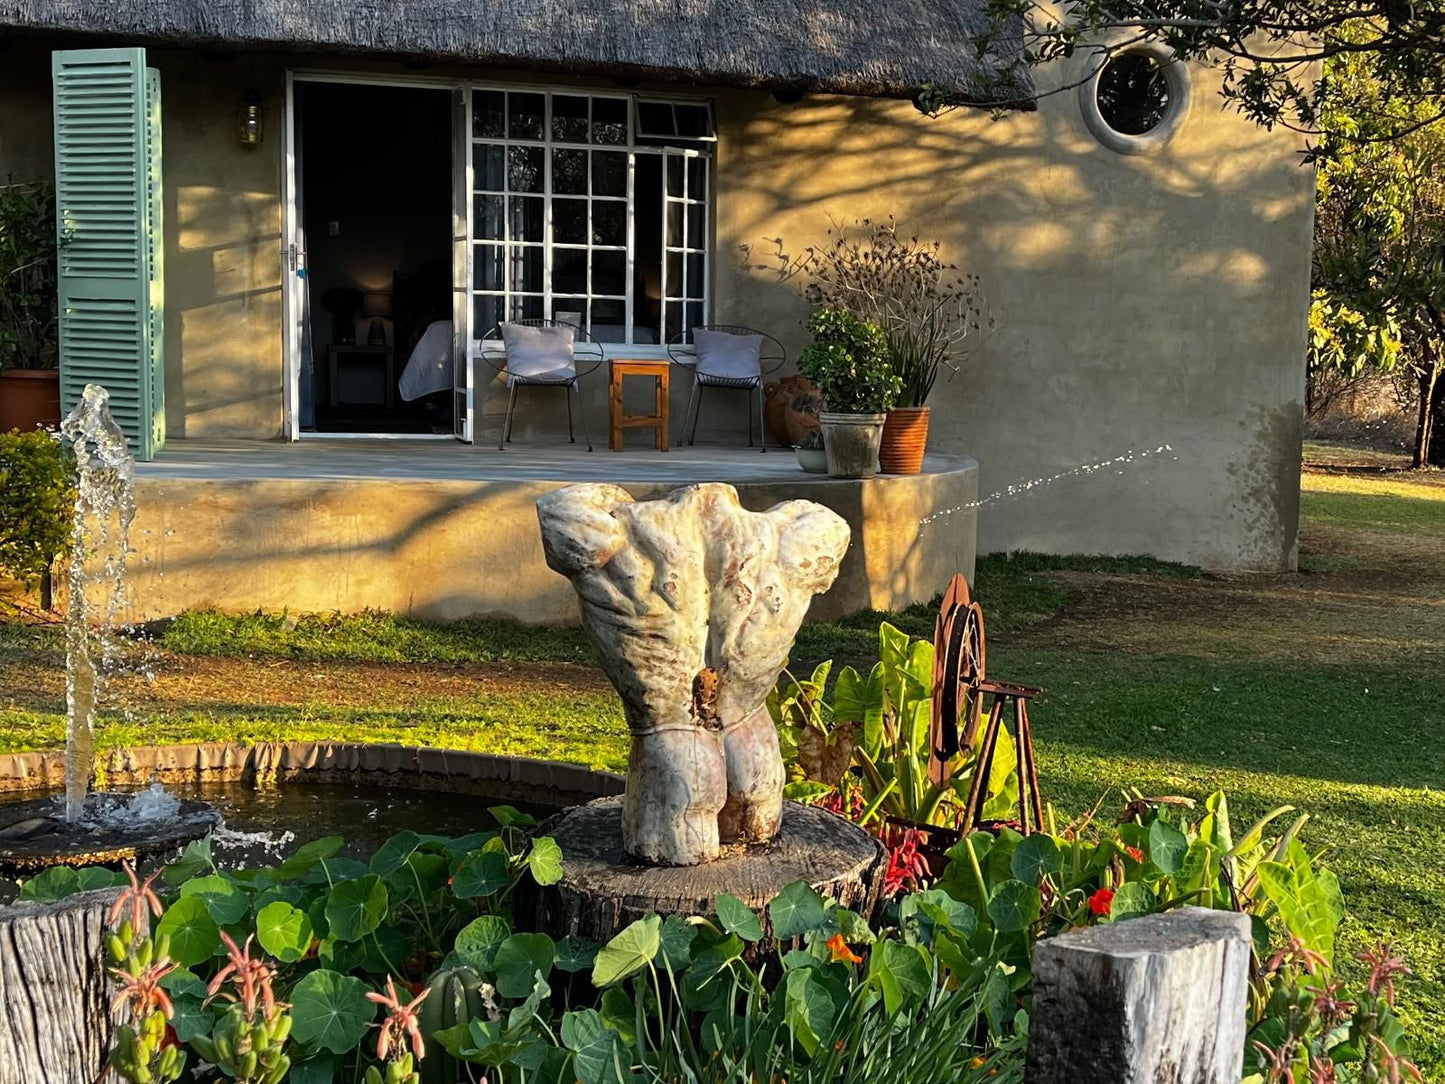 Oppiplasie Guest House Brits North West Province South Africa House, Building, Architecture, Plant, Nature, Garden